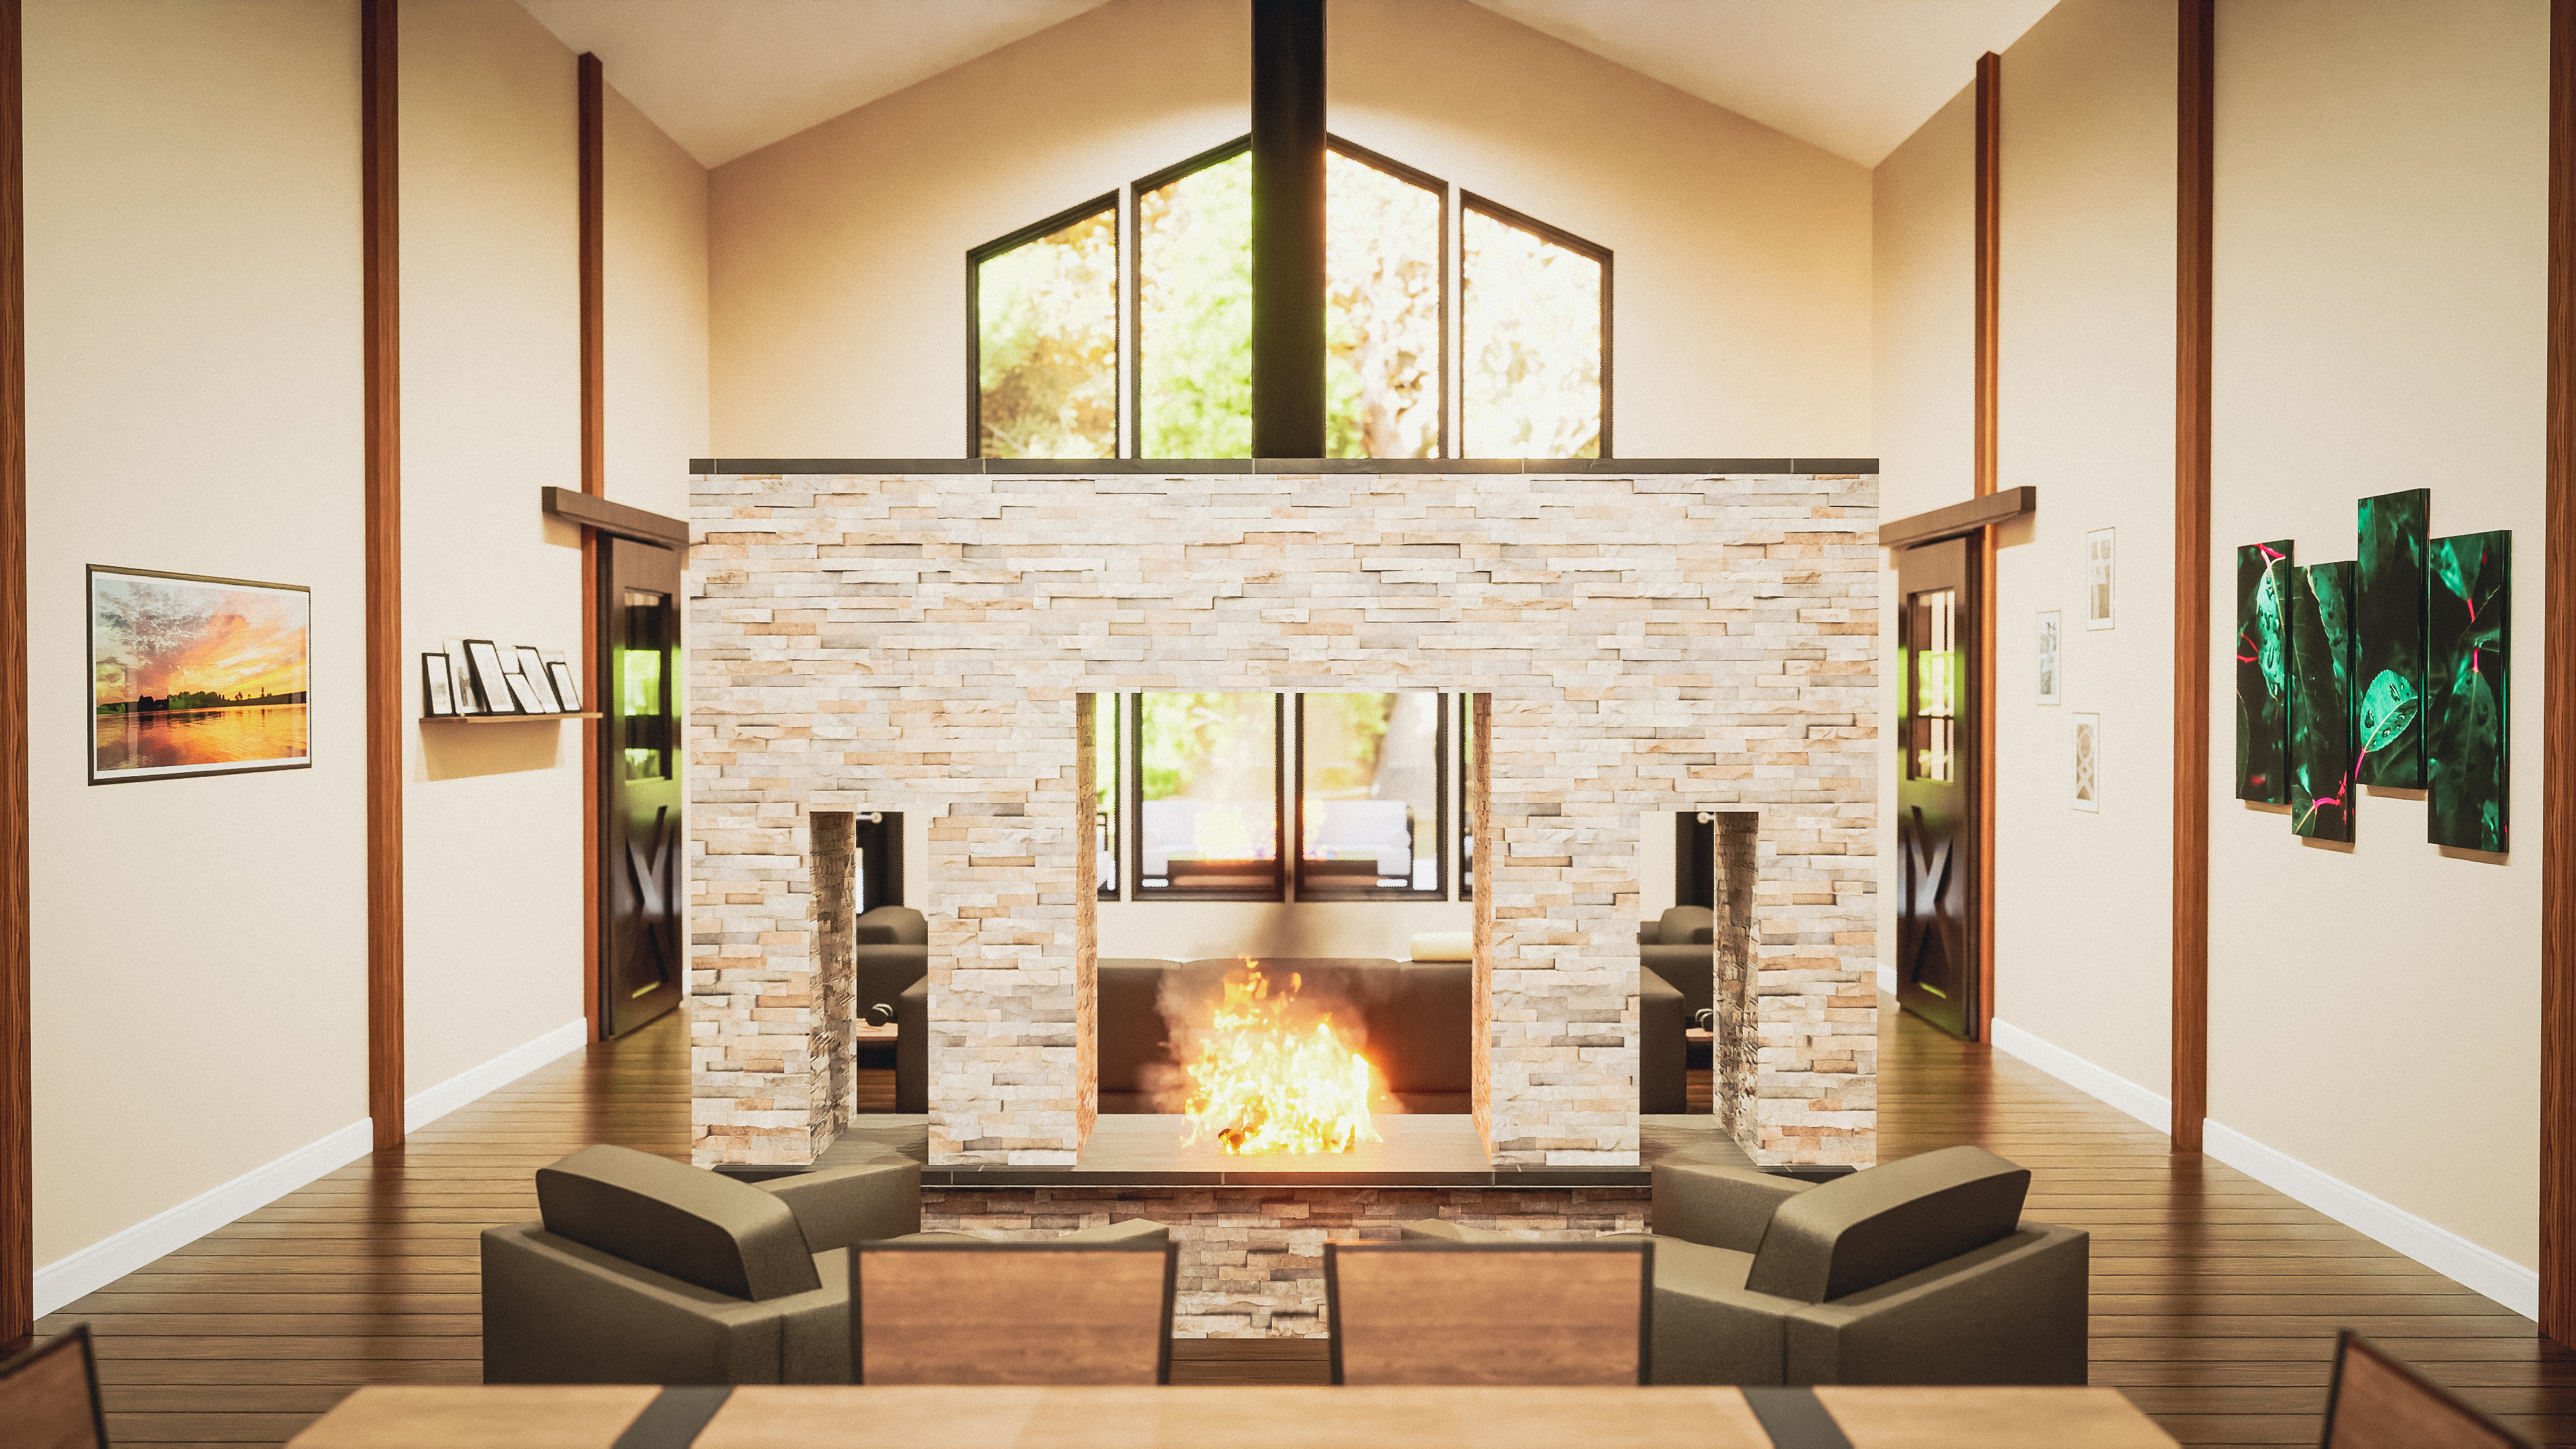 Rendering of Interior - Fireplace